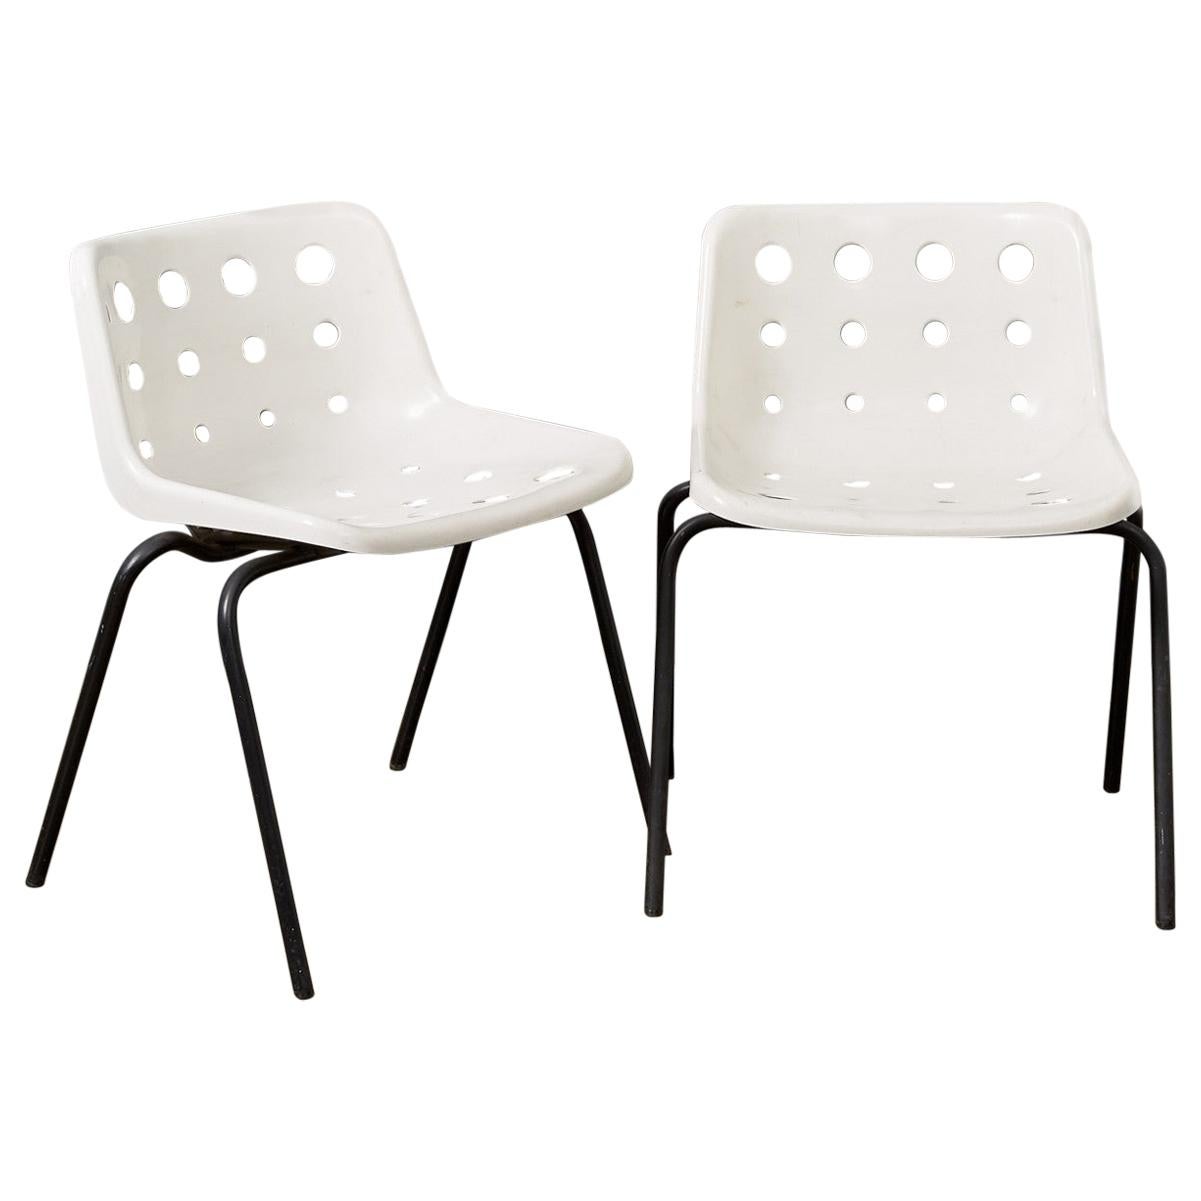 Pair of Polo Chairs